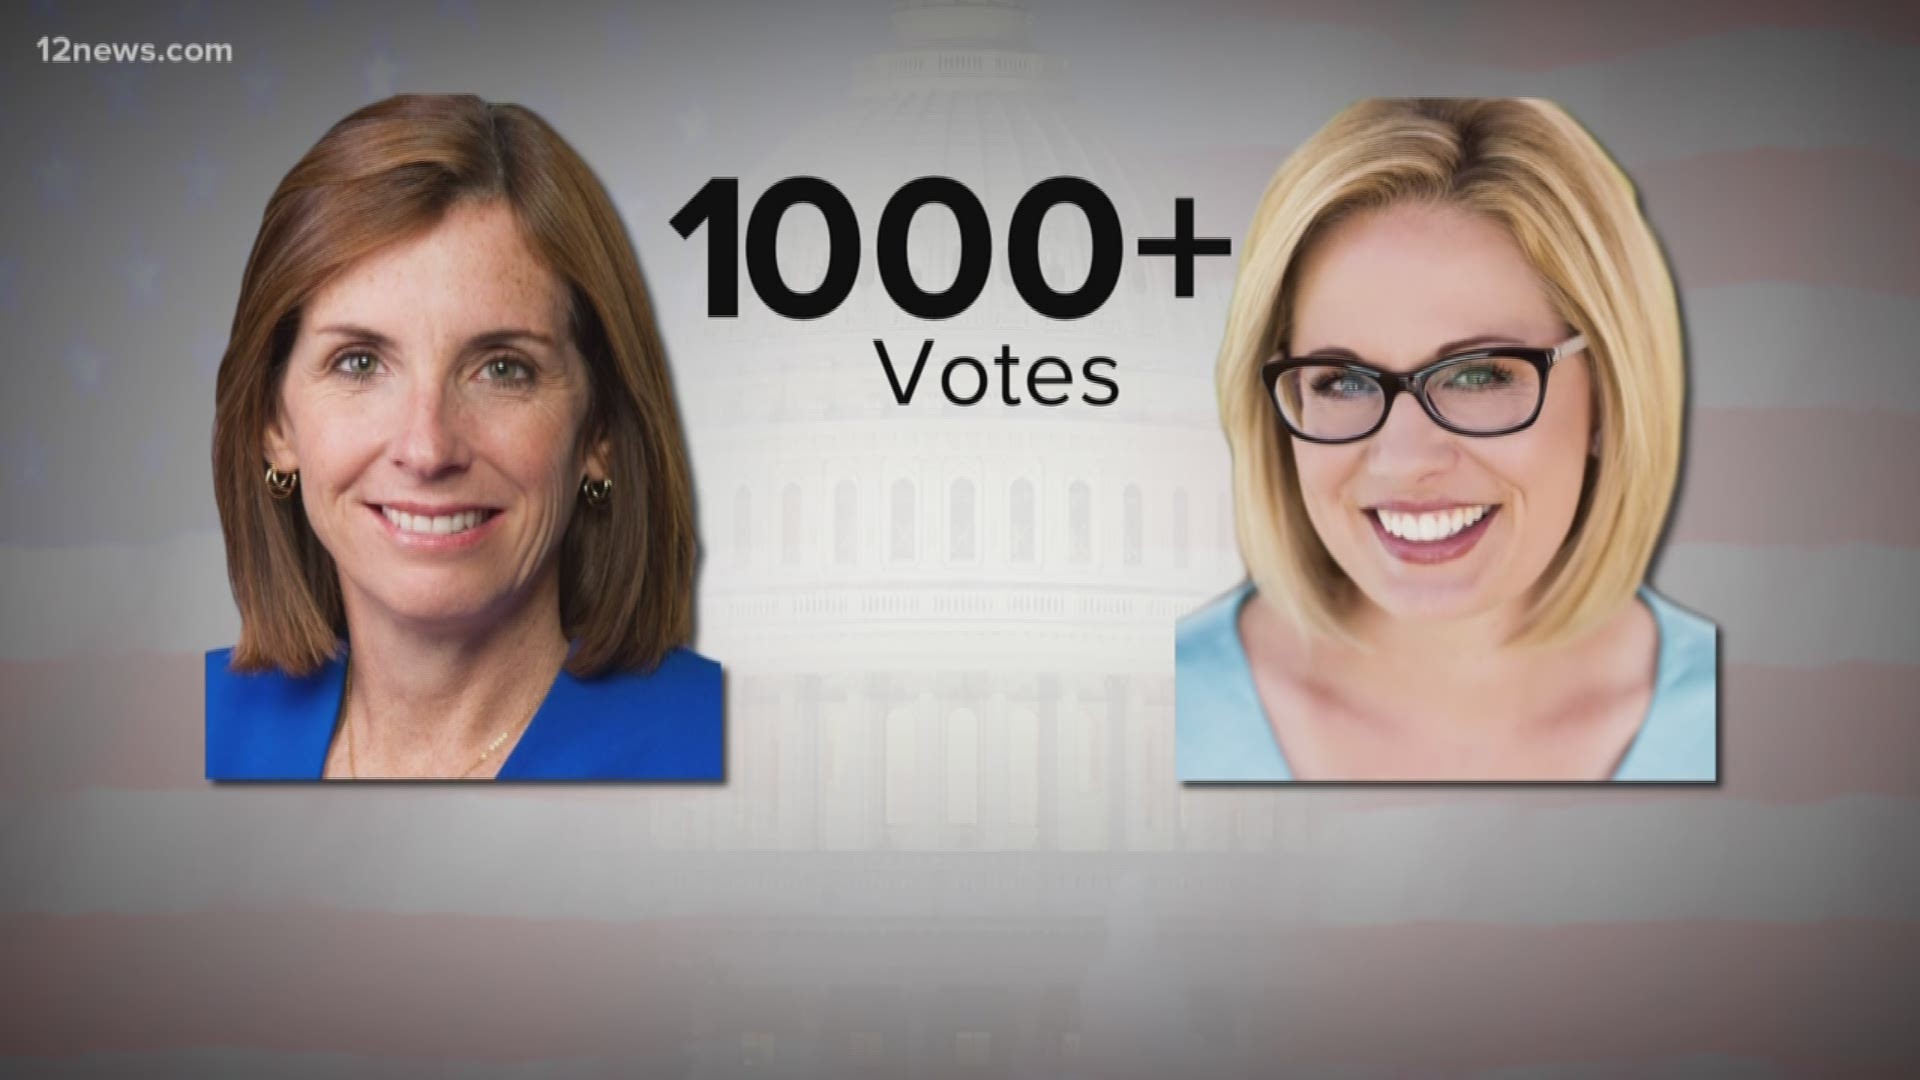 Senator-elect Kyrsten Sinema and appointed Senator Martha McSally were fierce rivals on the campaign trail this autumn, but now they will be colleagues in the US Senate. Given their past, we verify if the two Senators will be able to work together in DC.